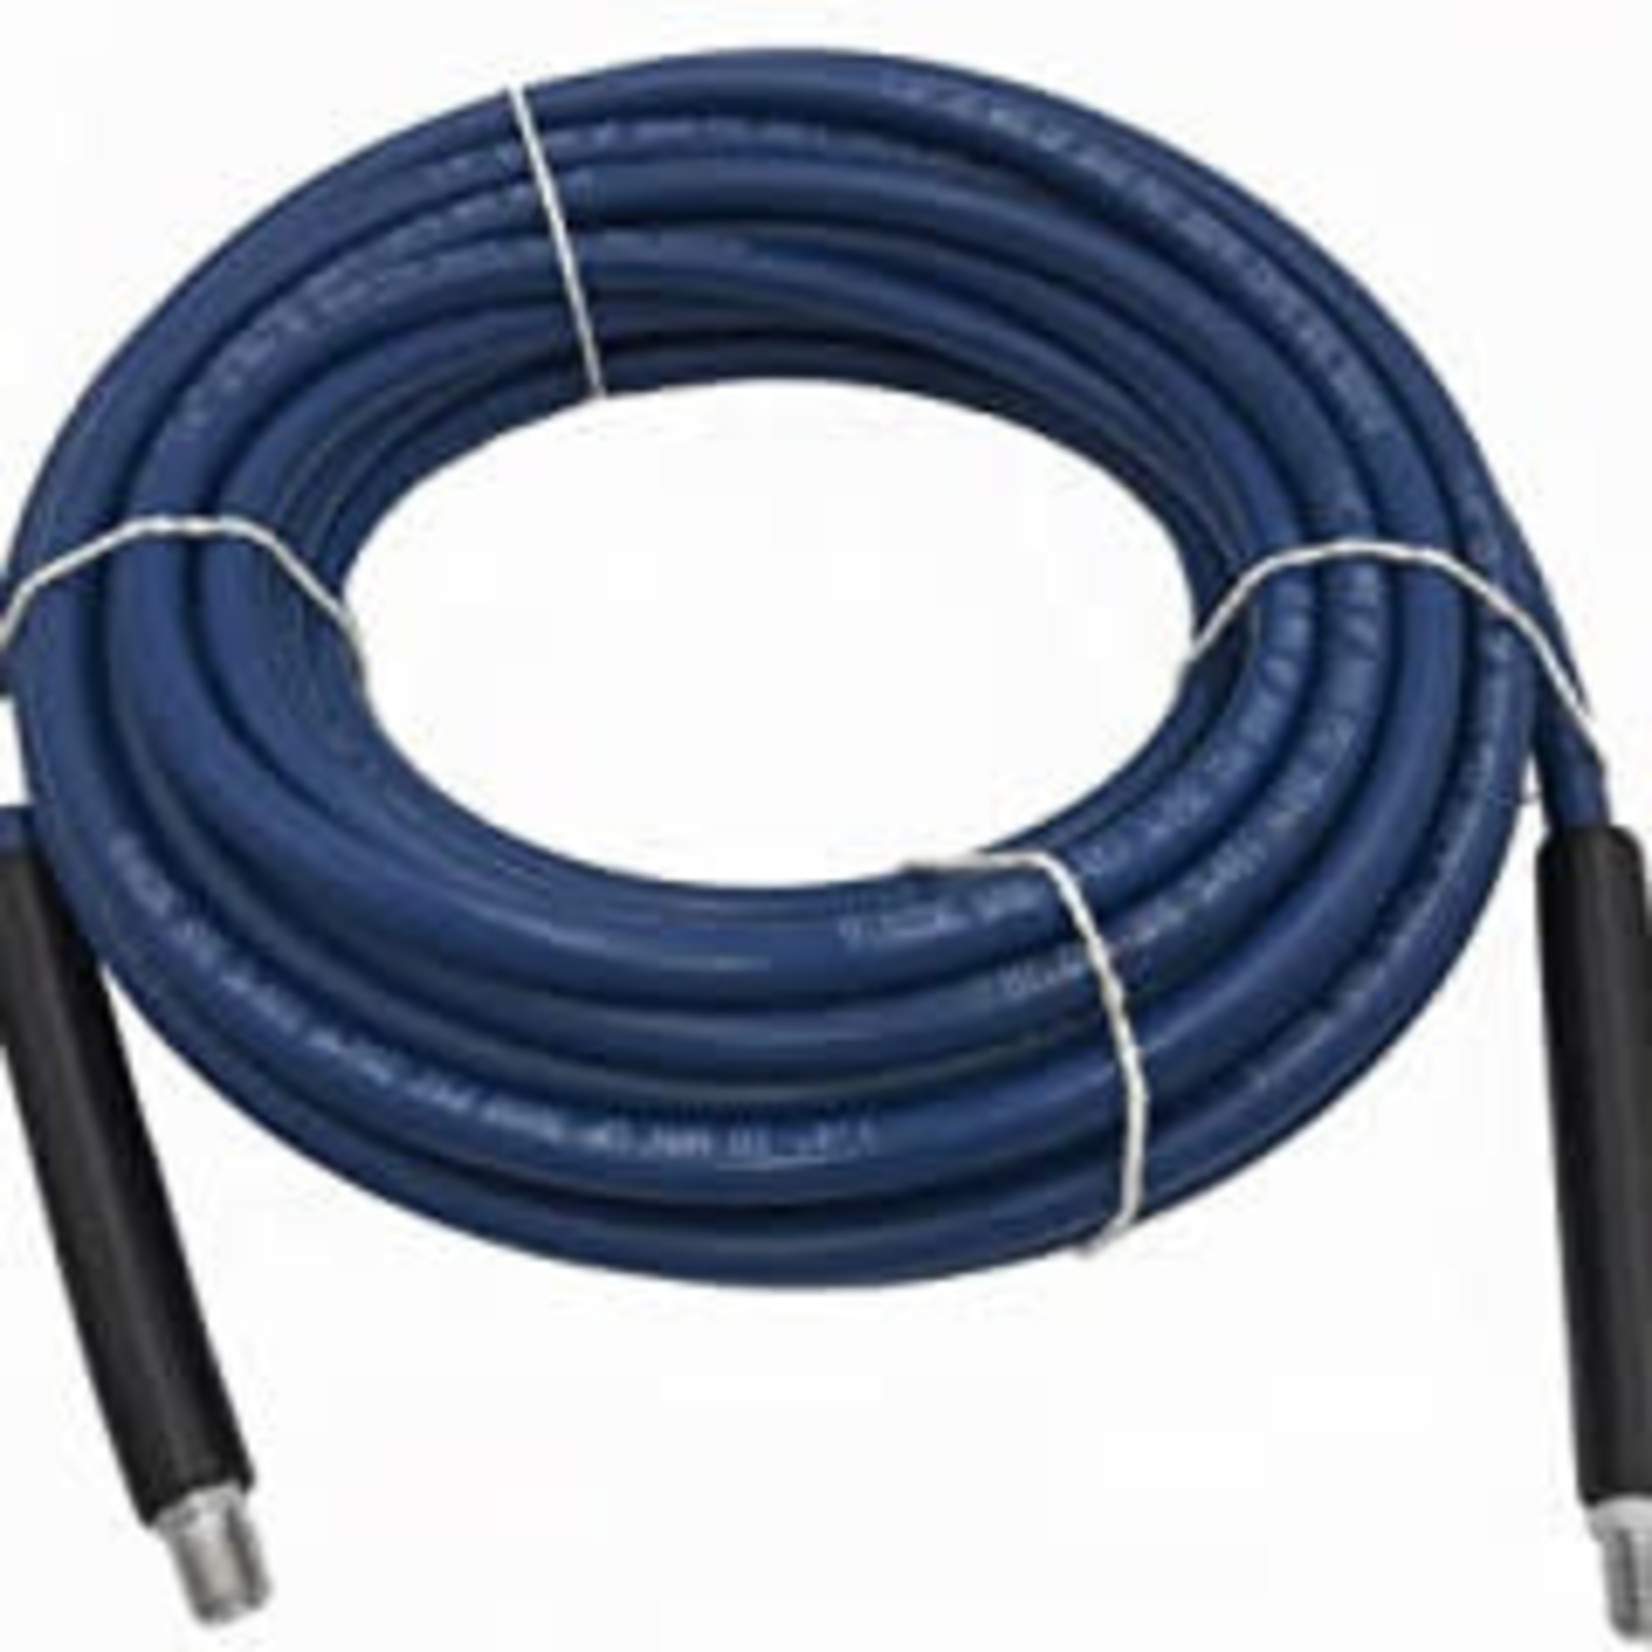 Dry It Center High Temp Carpet Cleaning Solution Hose : Size:1/4" x 100'